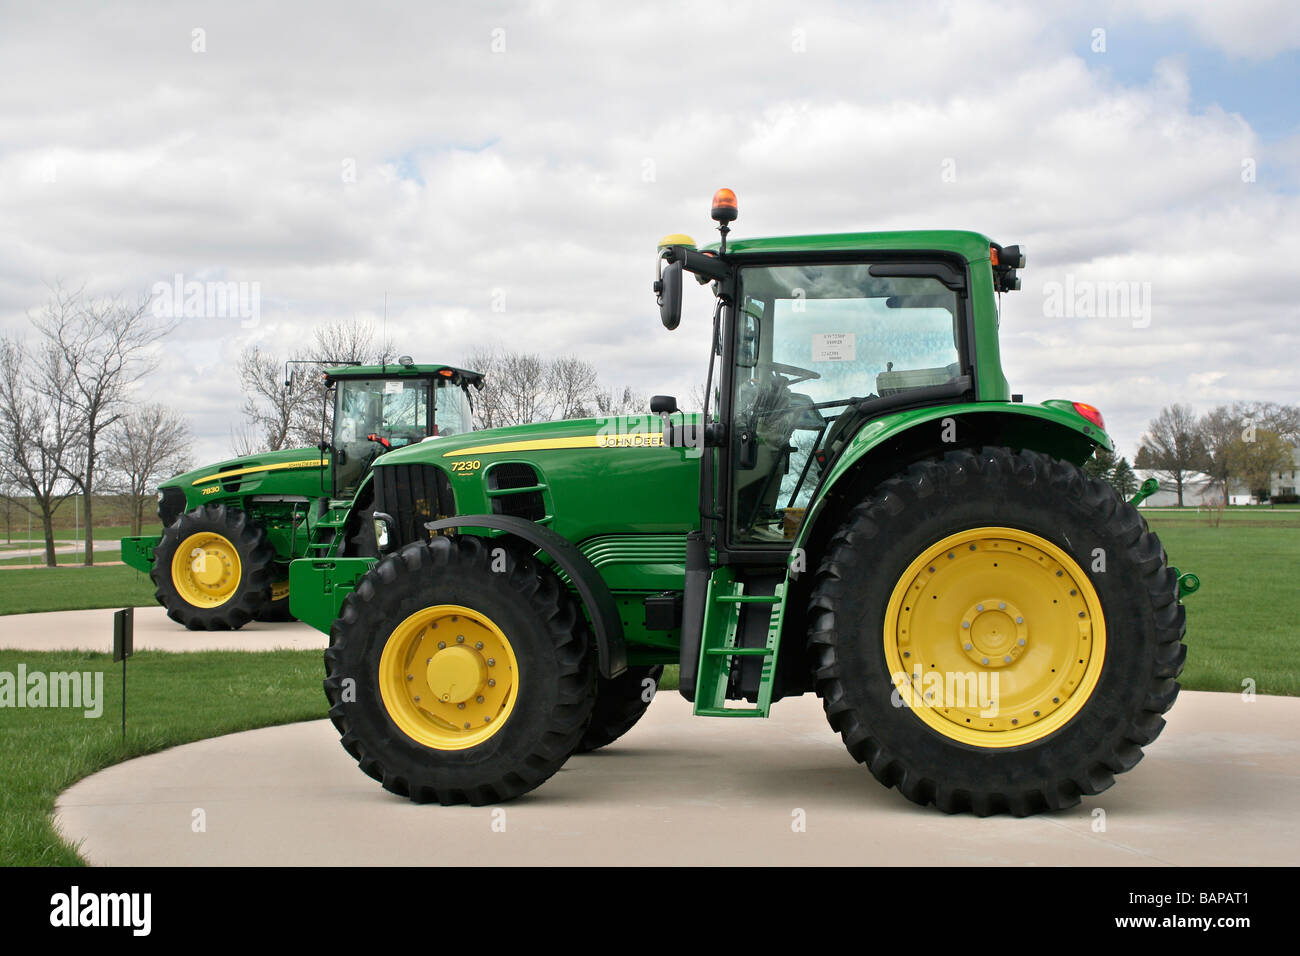 John Deere tractors on display in front of the tractor assembly plant Waterloo Iowa Stock Photo